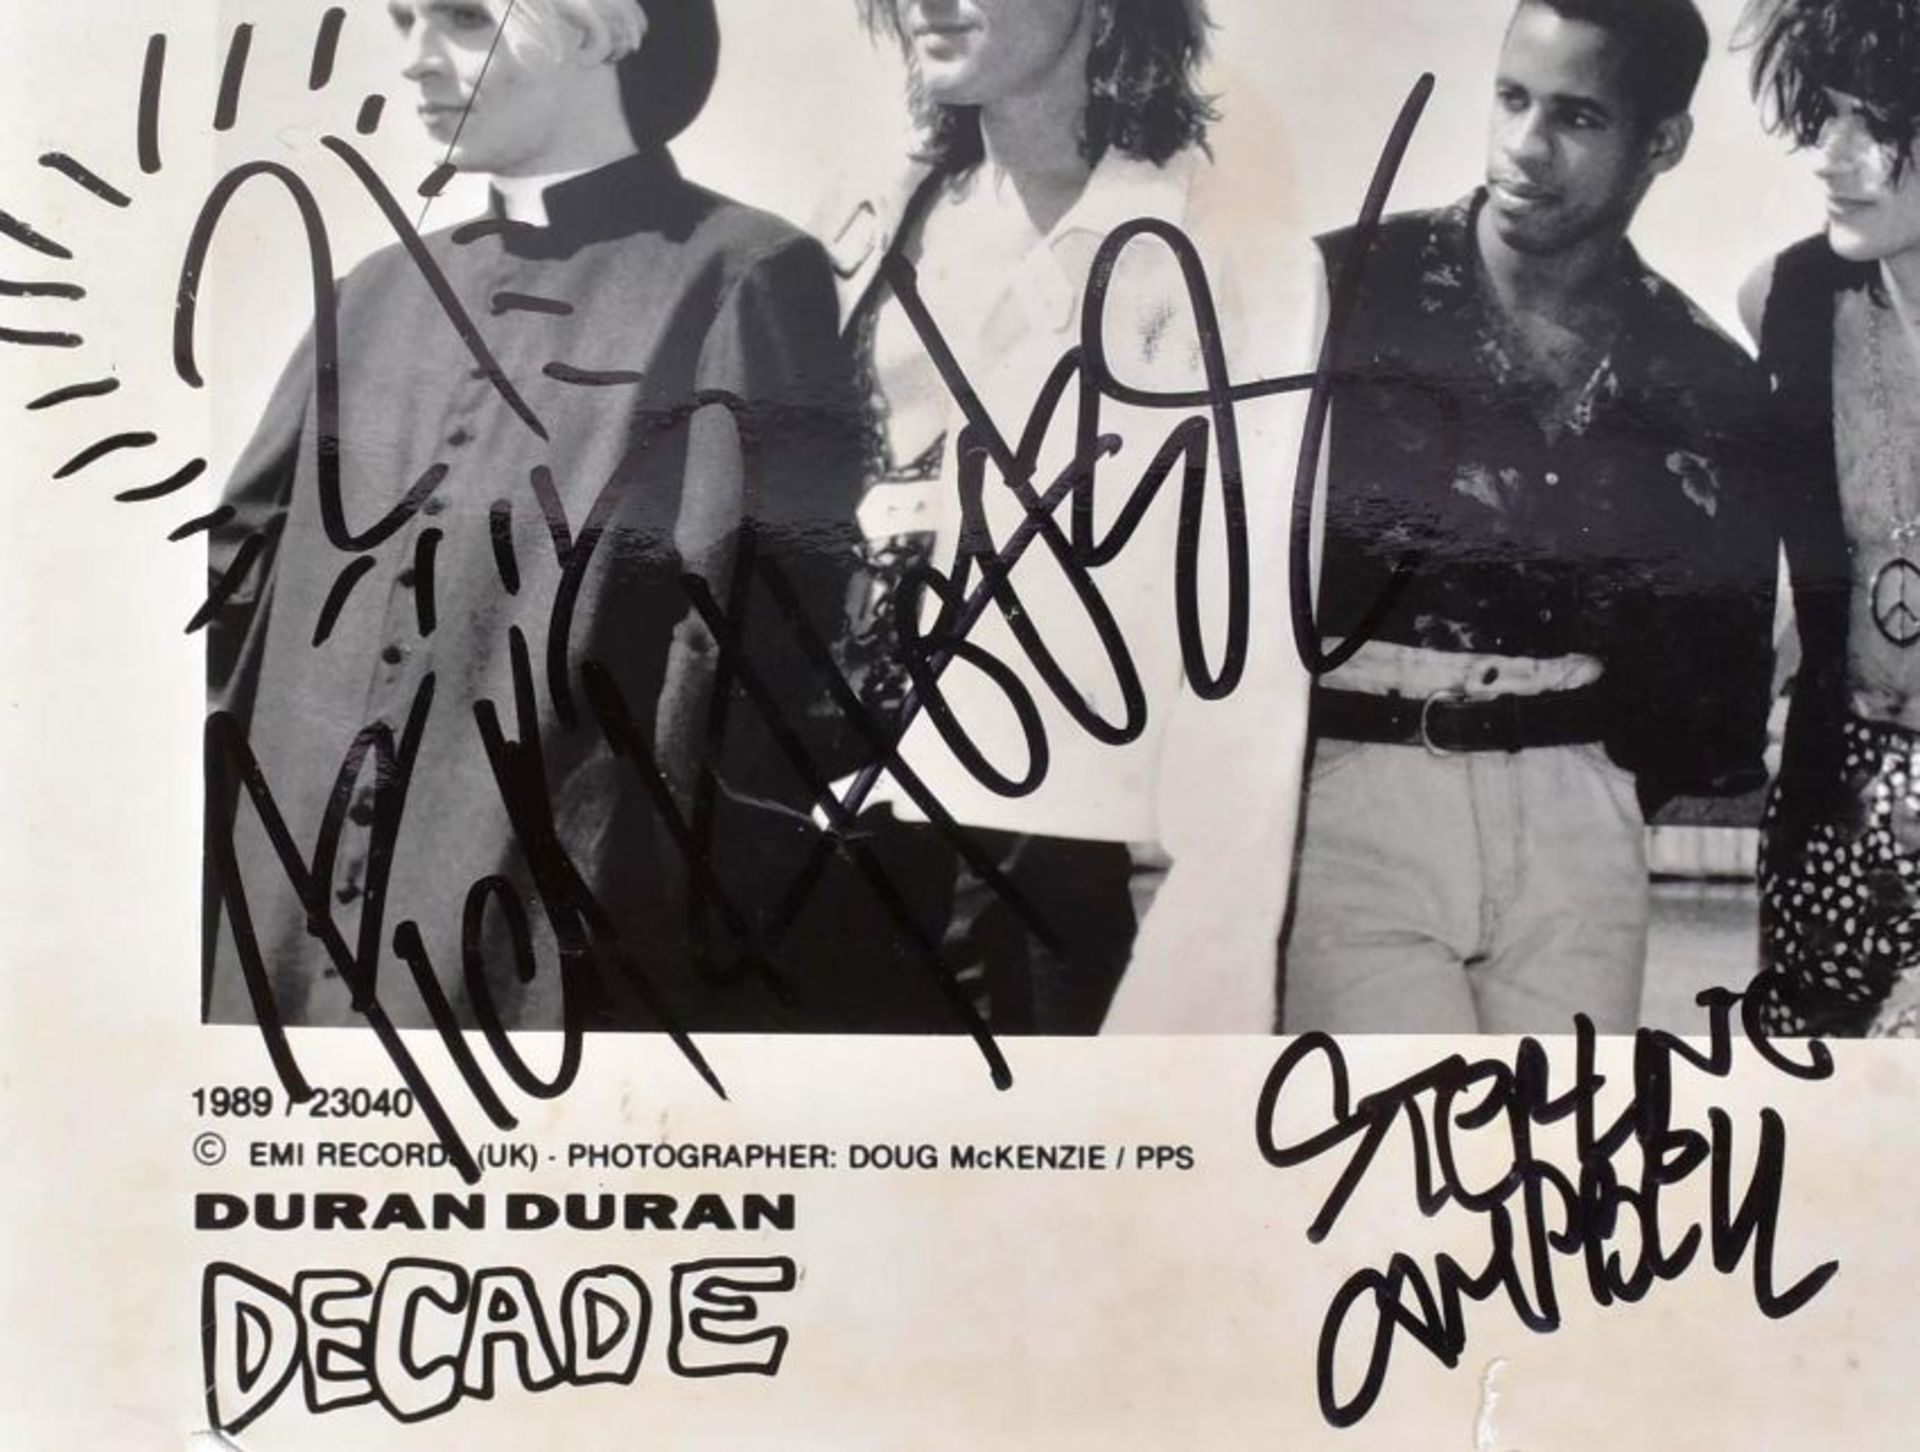 DURAN DURAN (ENGLISH BAND) - 1980S AUTOGRAPHED 8X10" PHOTO - Image 4 of 4